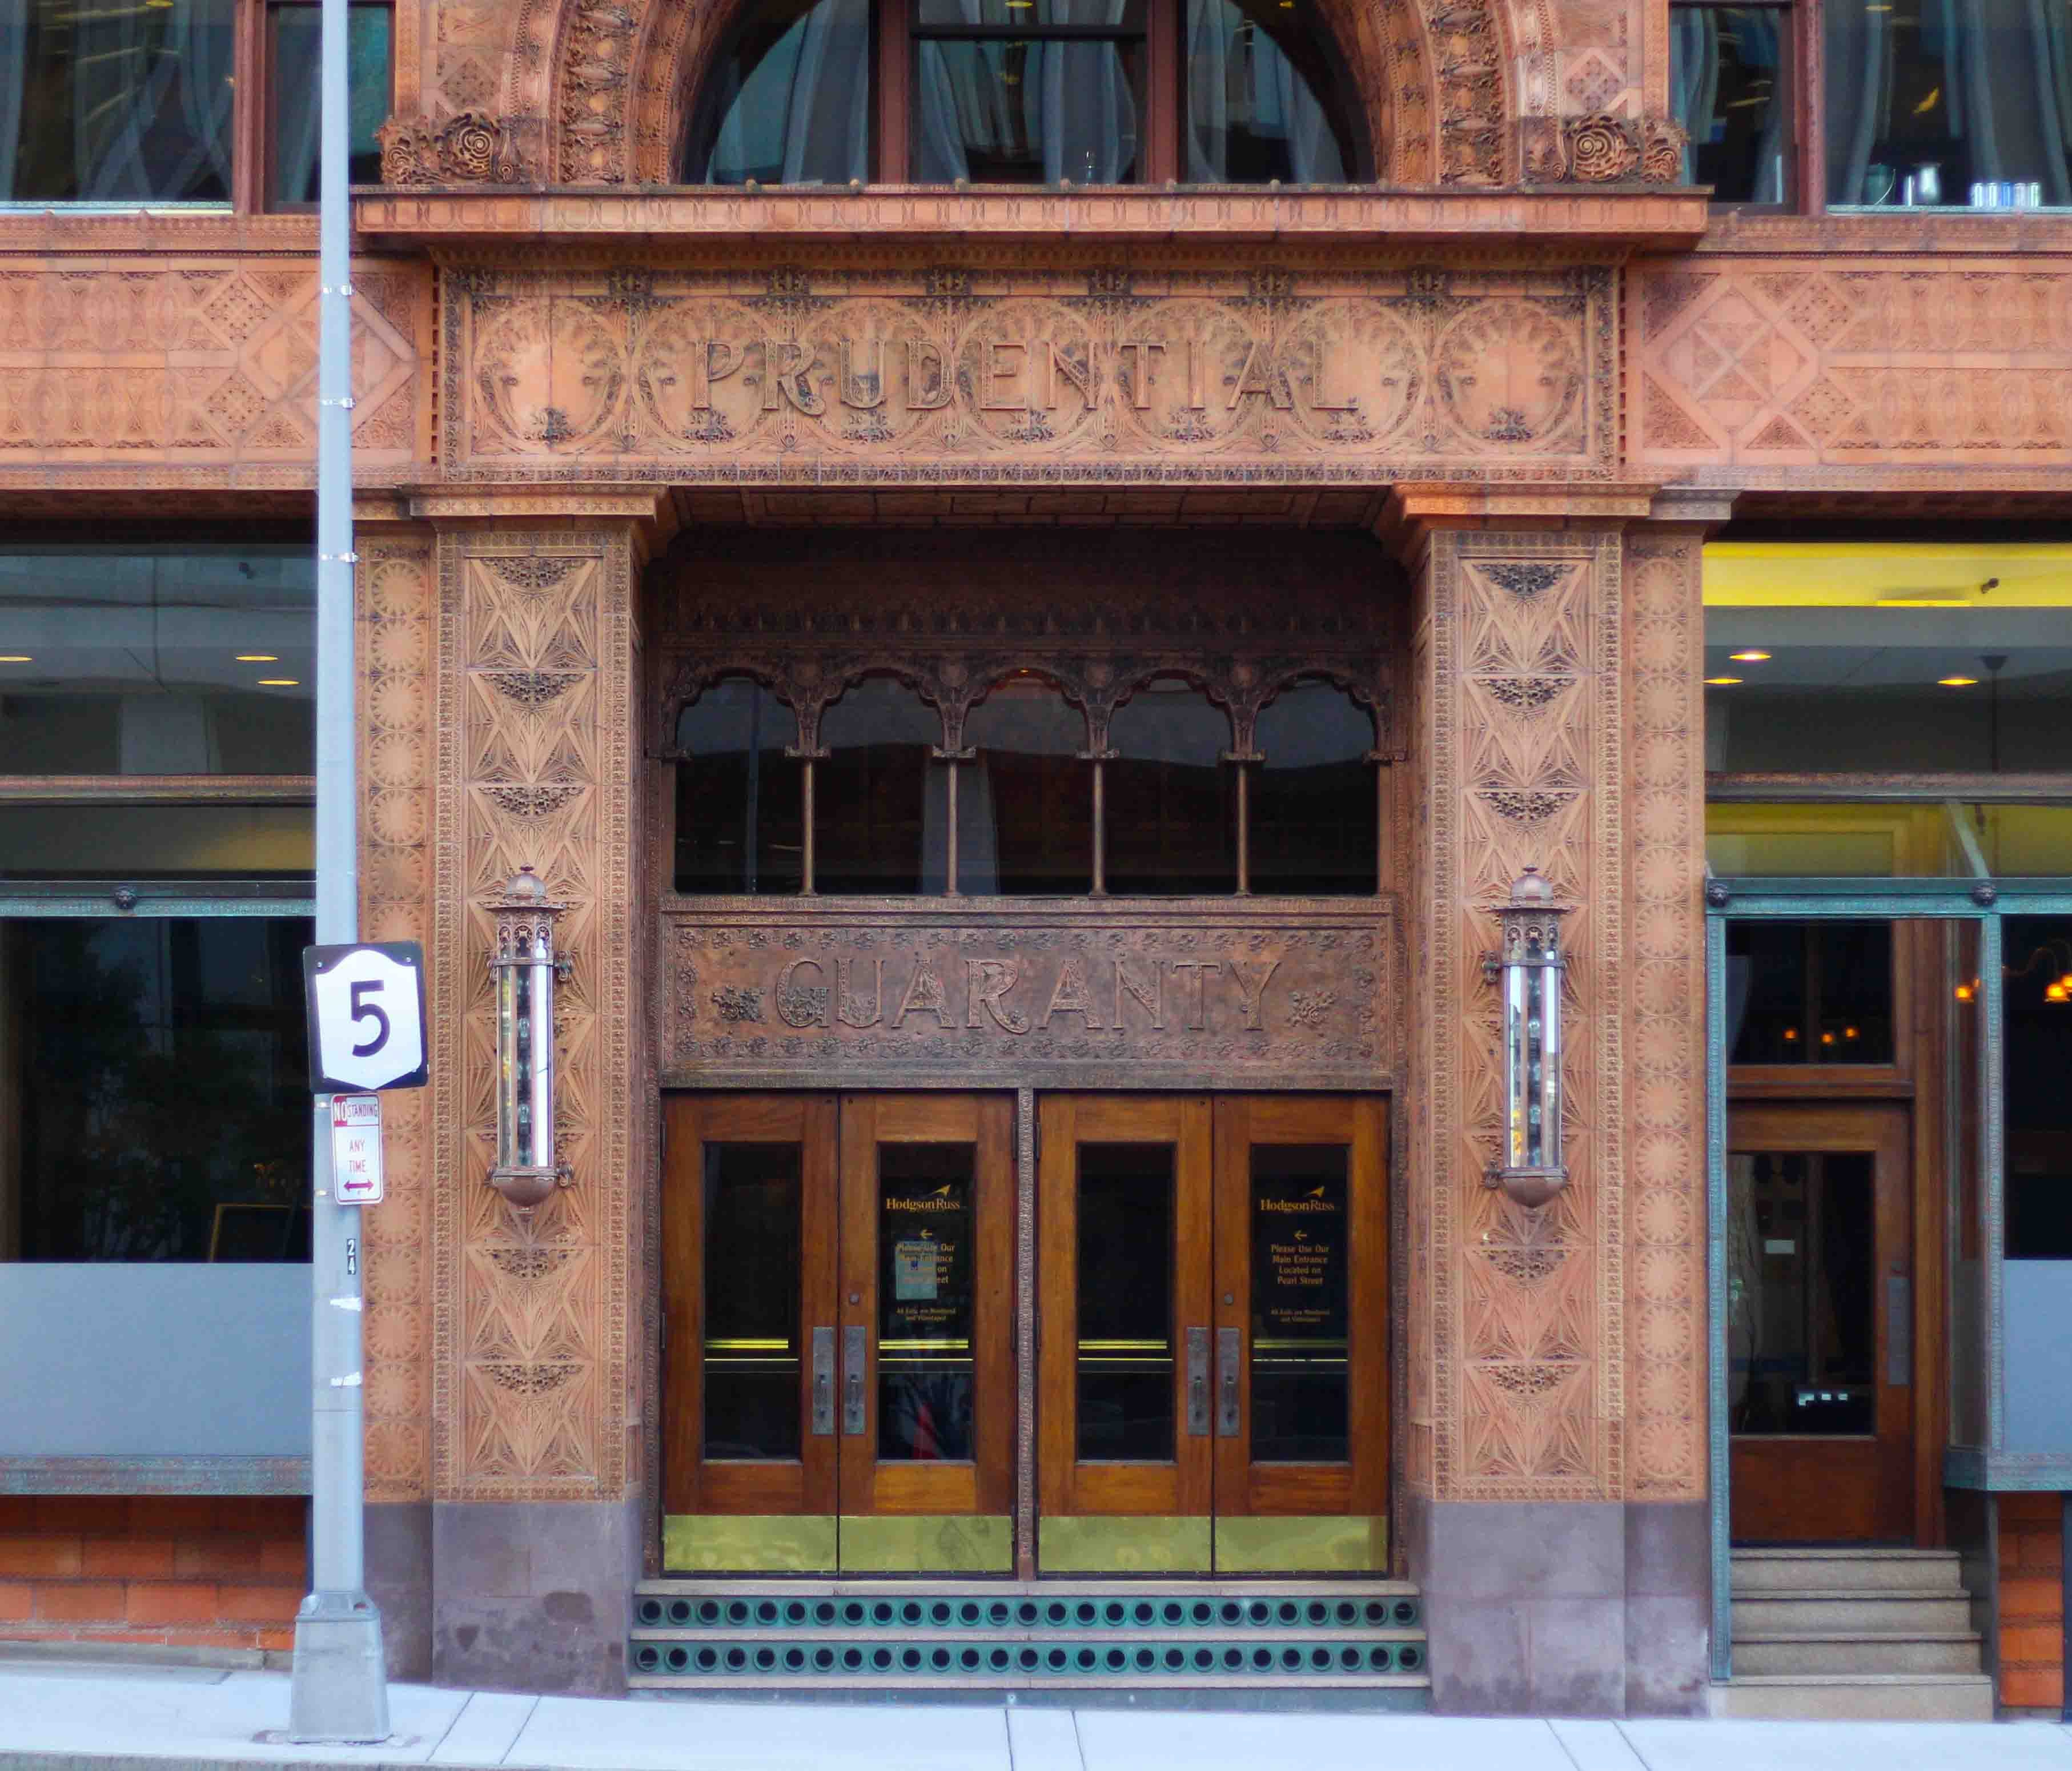 The Guaranty Building was threatened with demolition in the 1970s, restored a decade later and renovated in 2008.